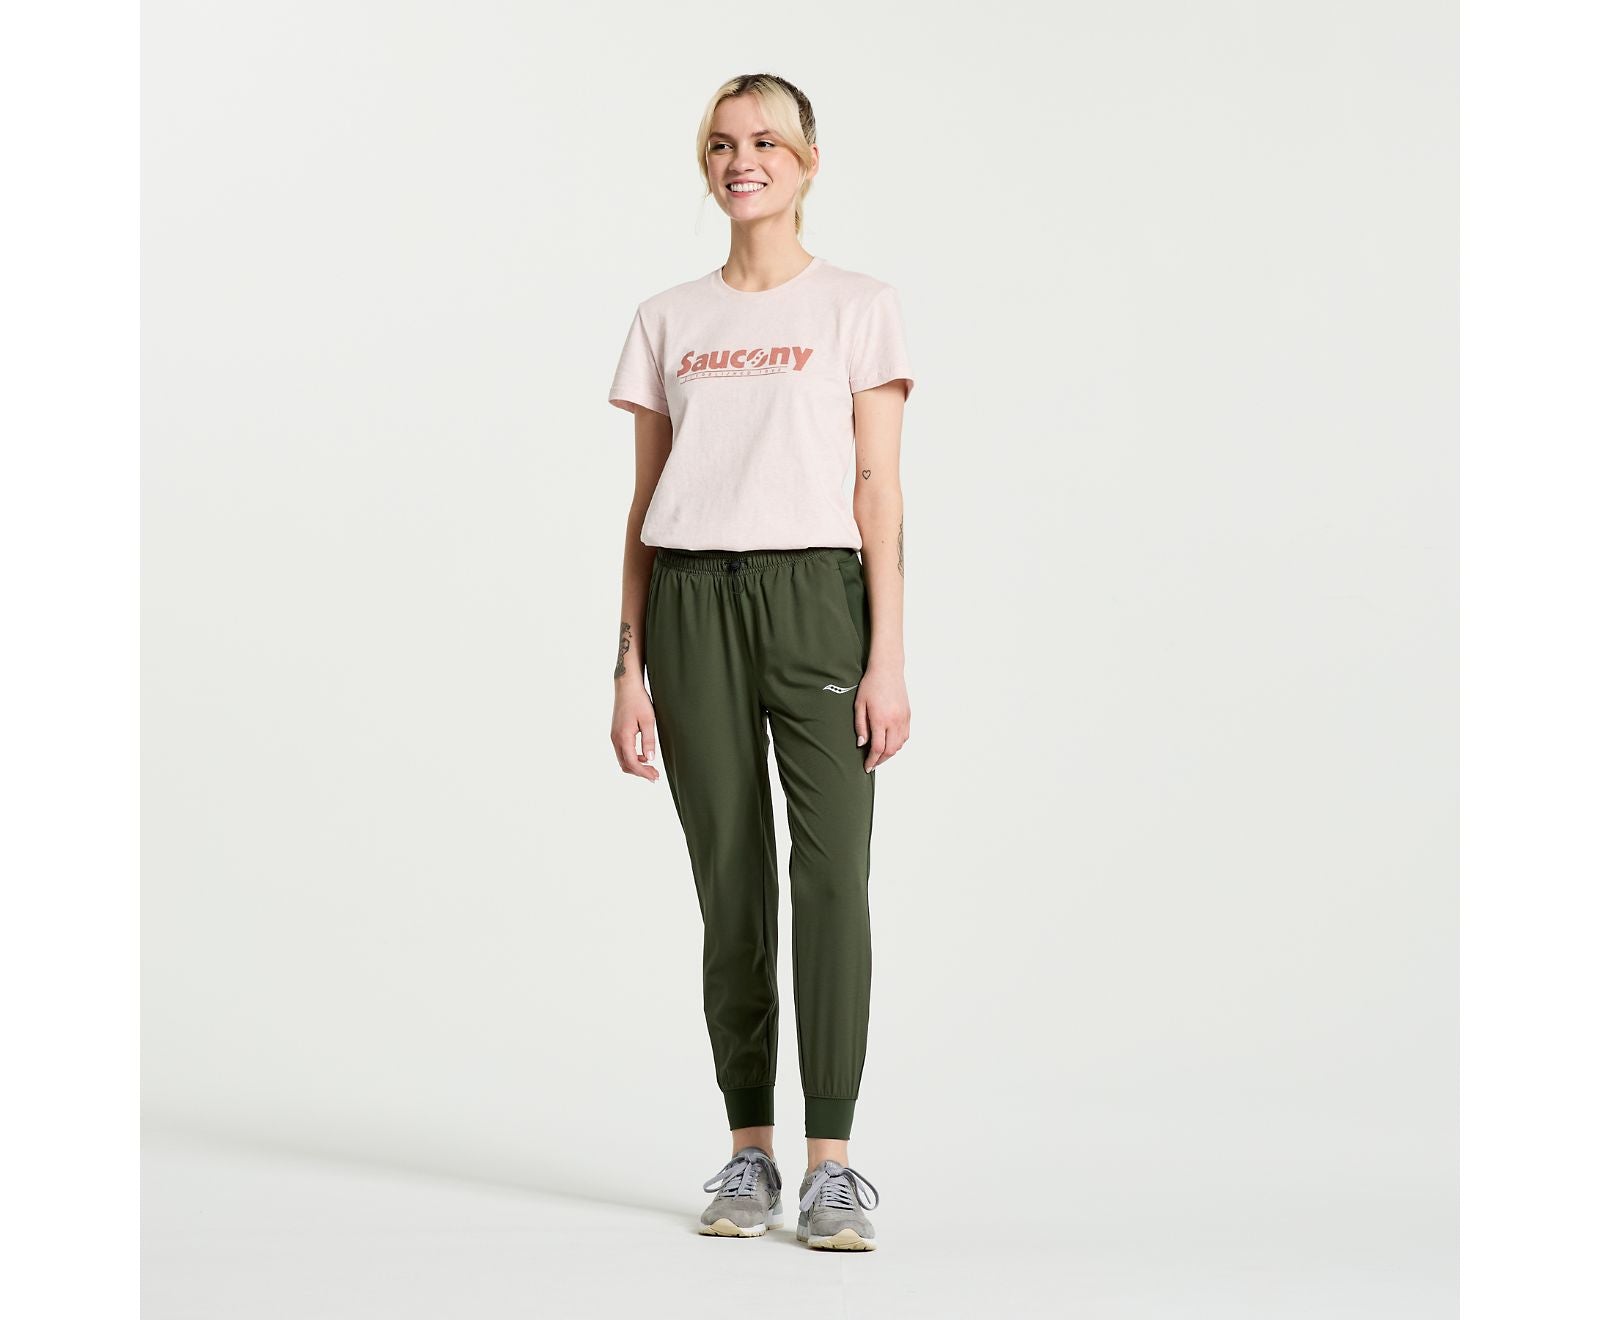 SAUCONY RESTED T-SHIRT F/W